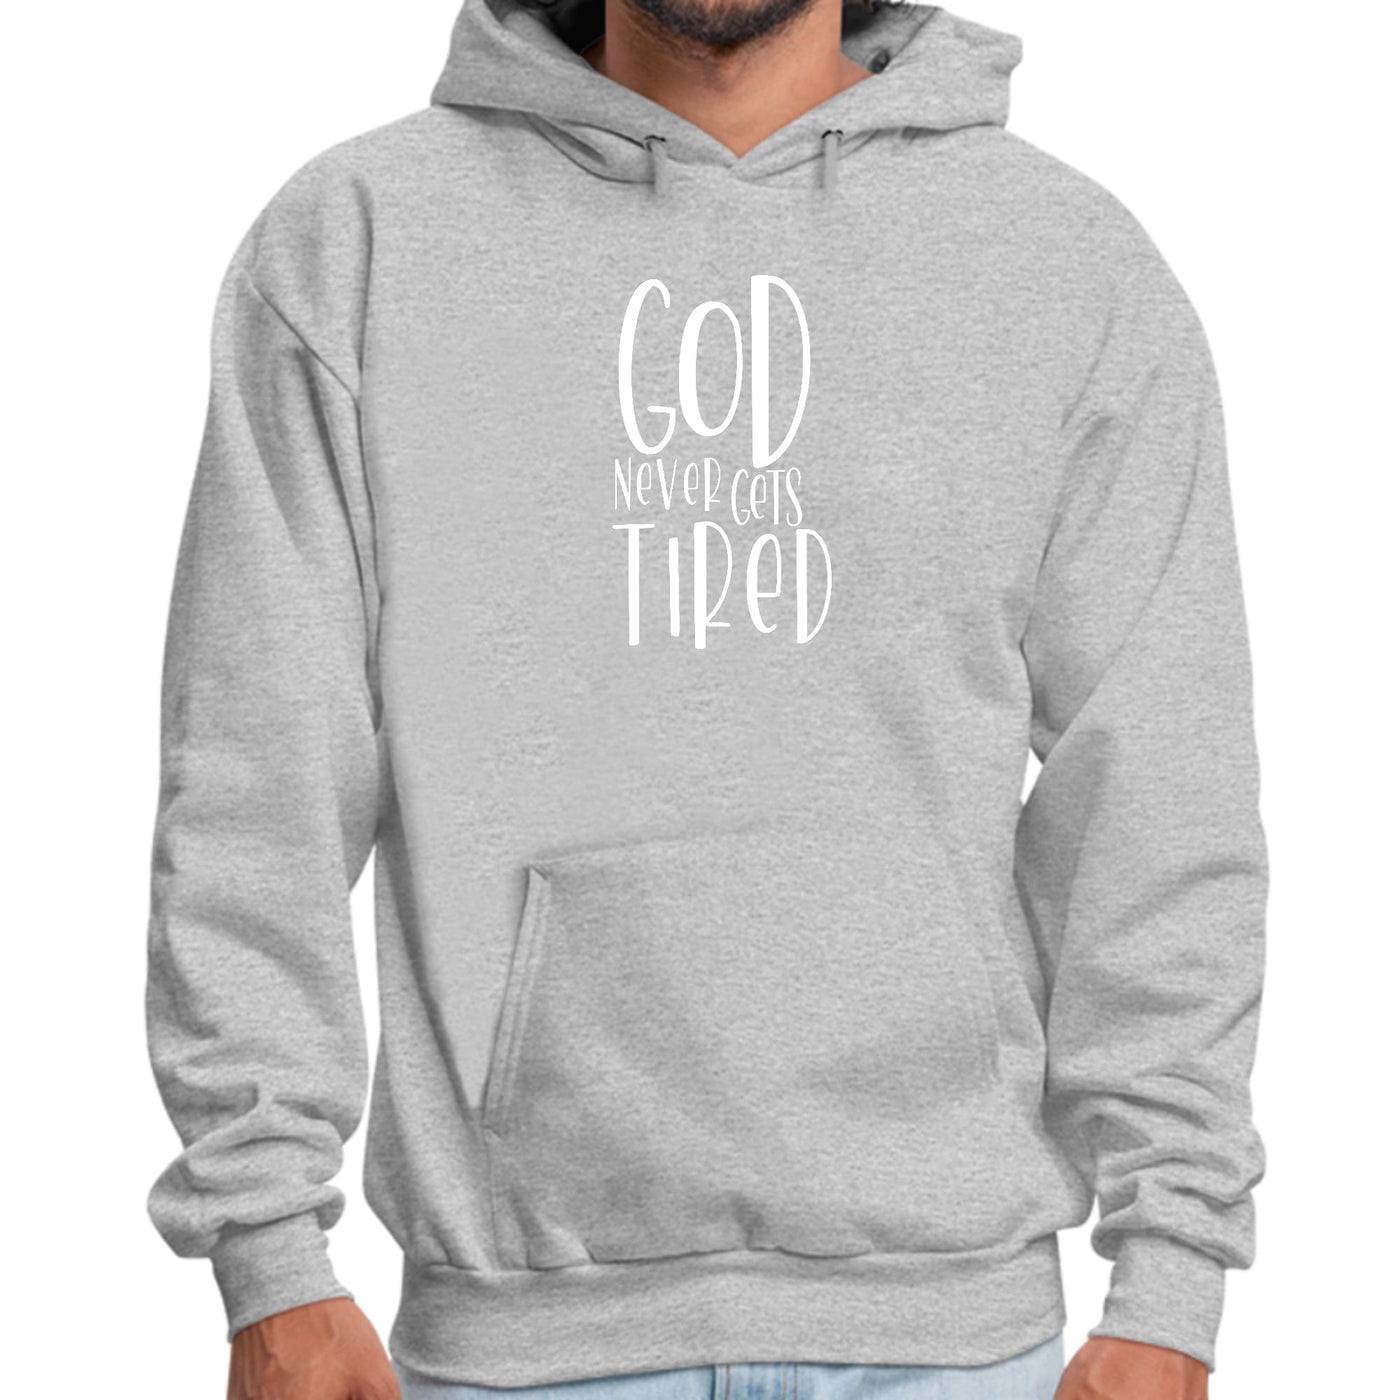 Mens Graphic Hoodie Say It Soul - God Never Gets Tired - Unisex | Hoodies